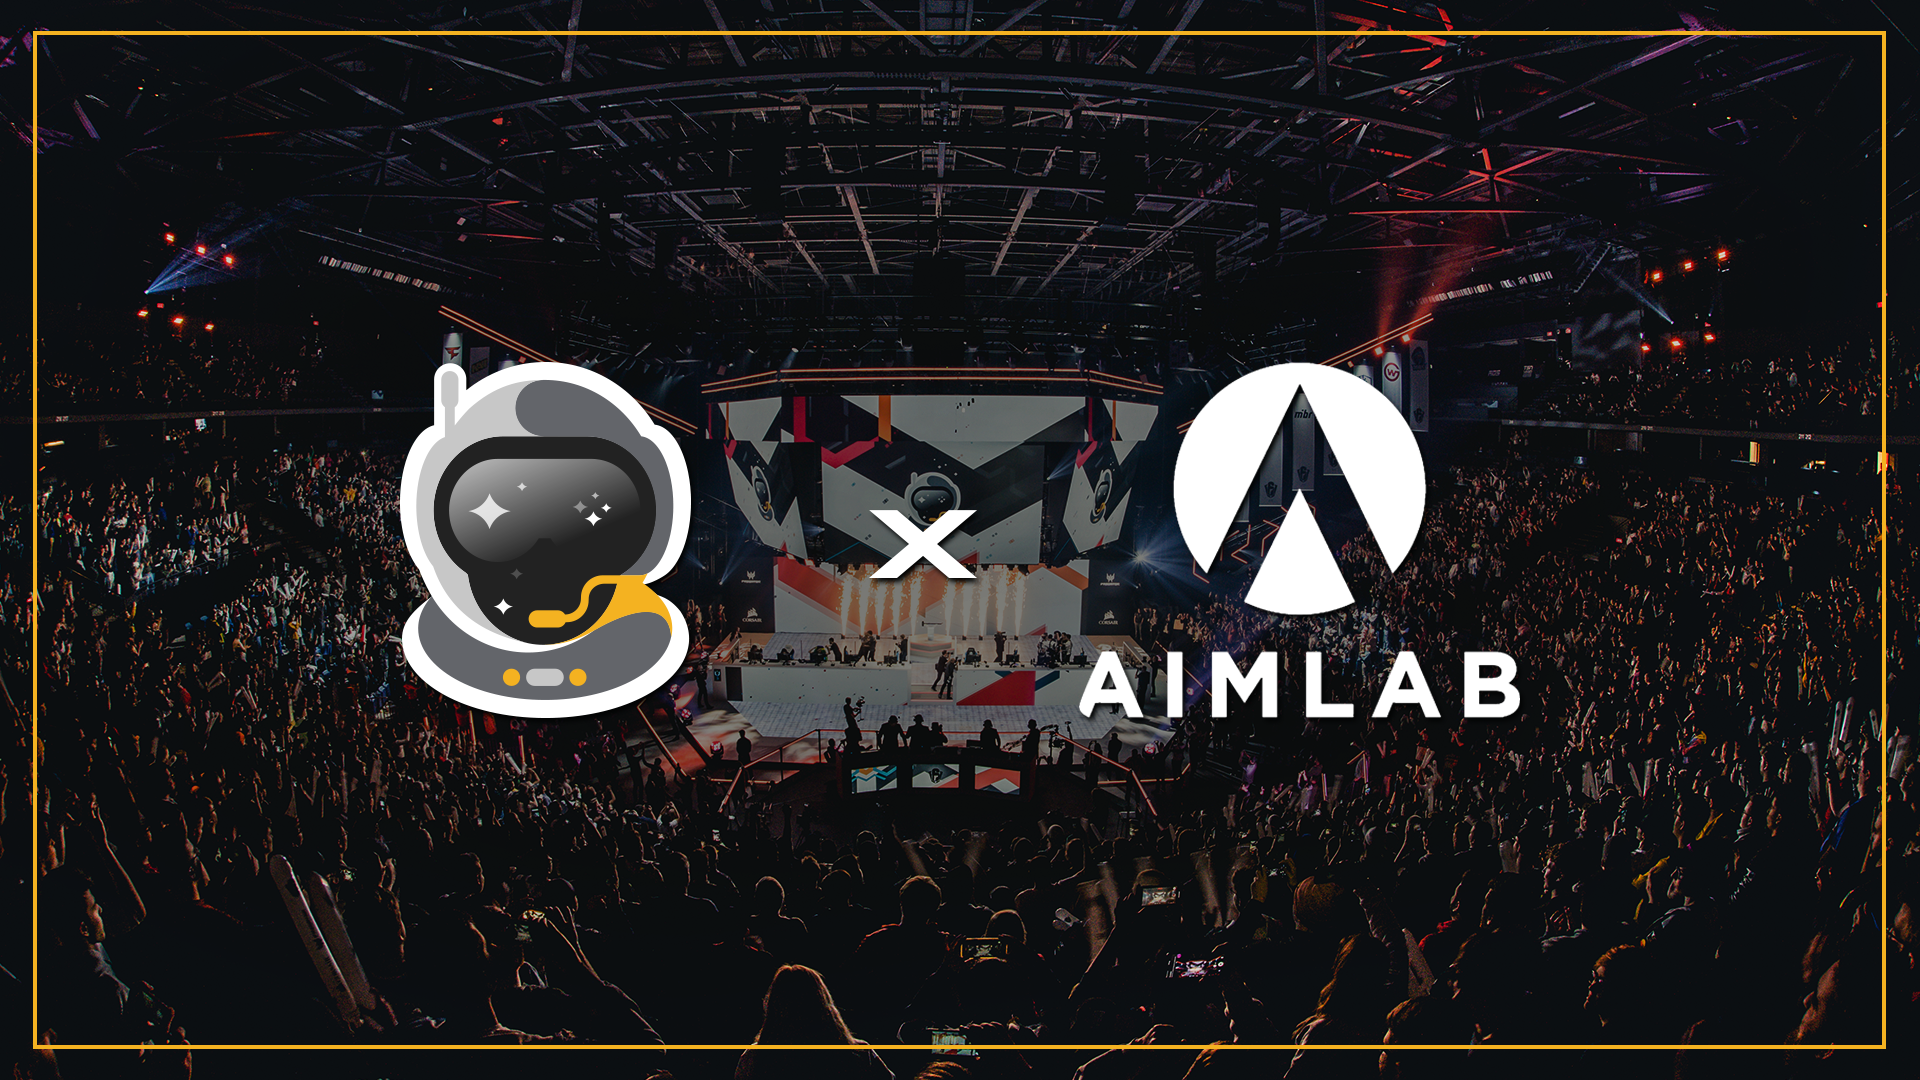 Spacestation Gaming takes a shot with Aim Lab partnership